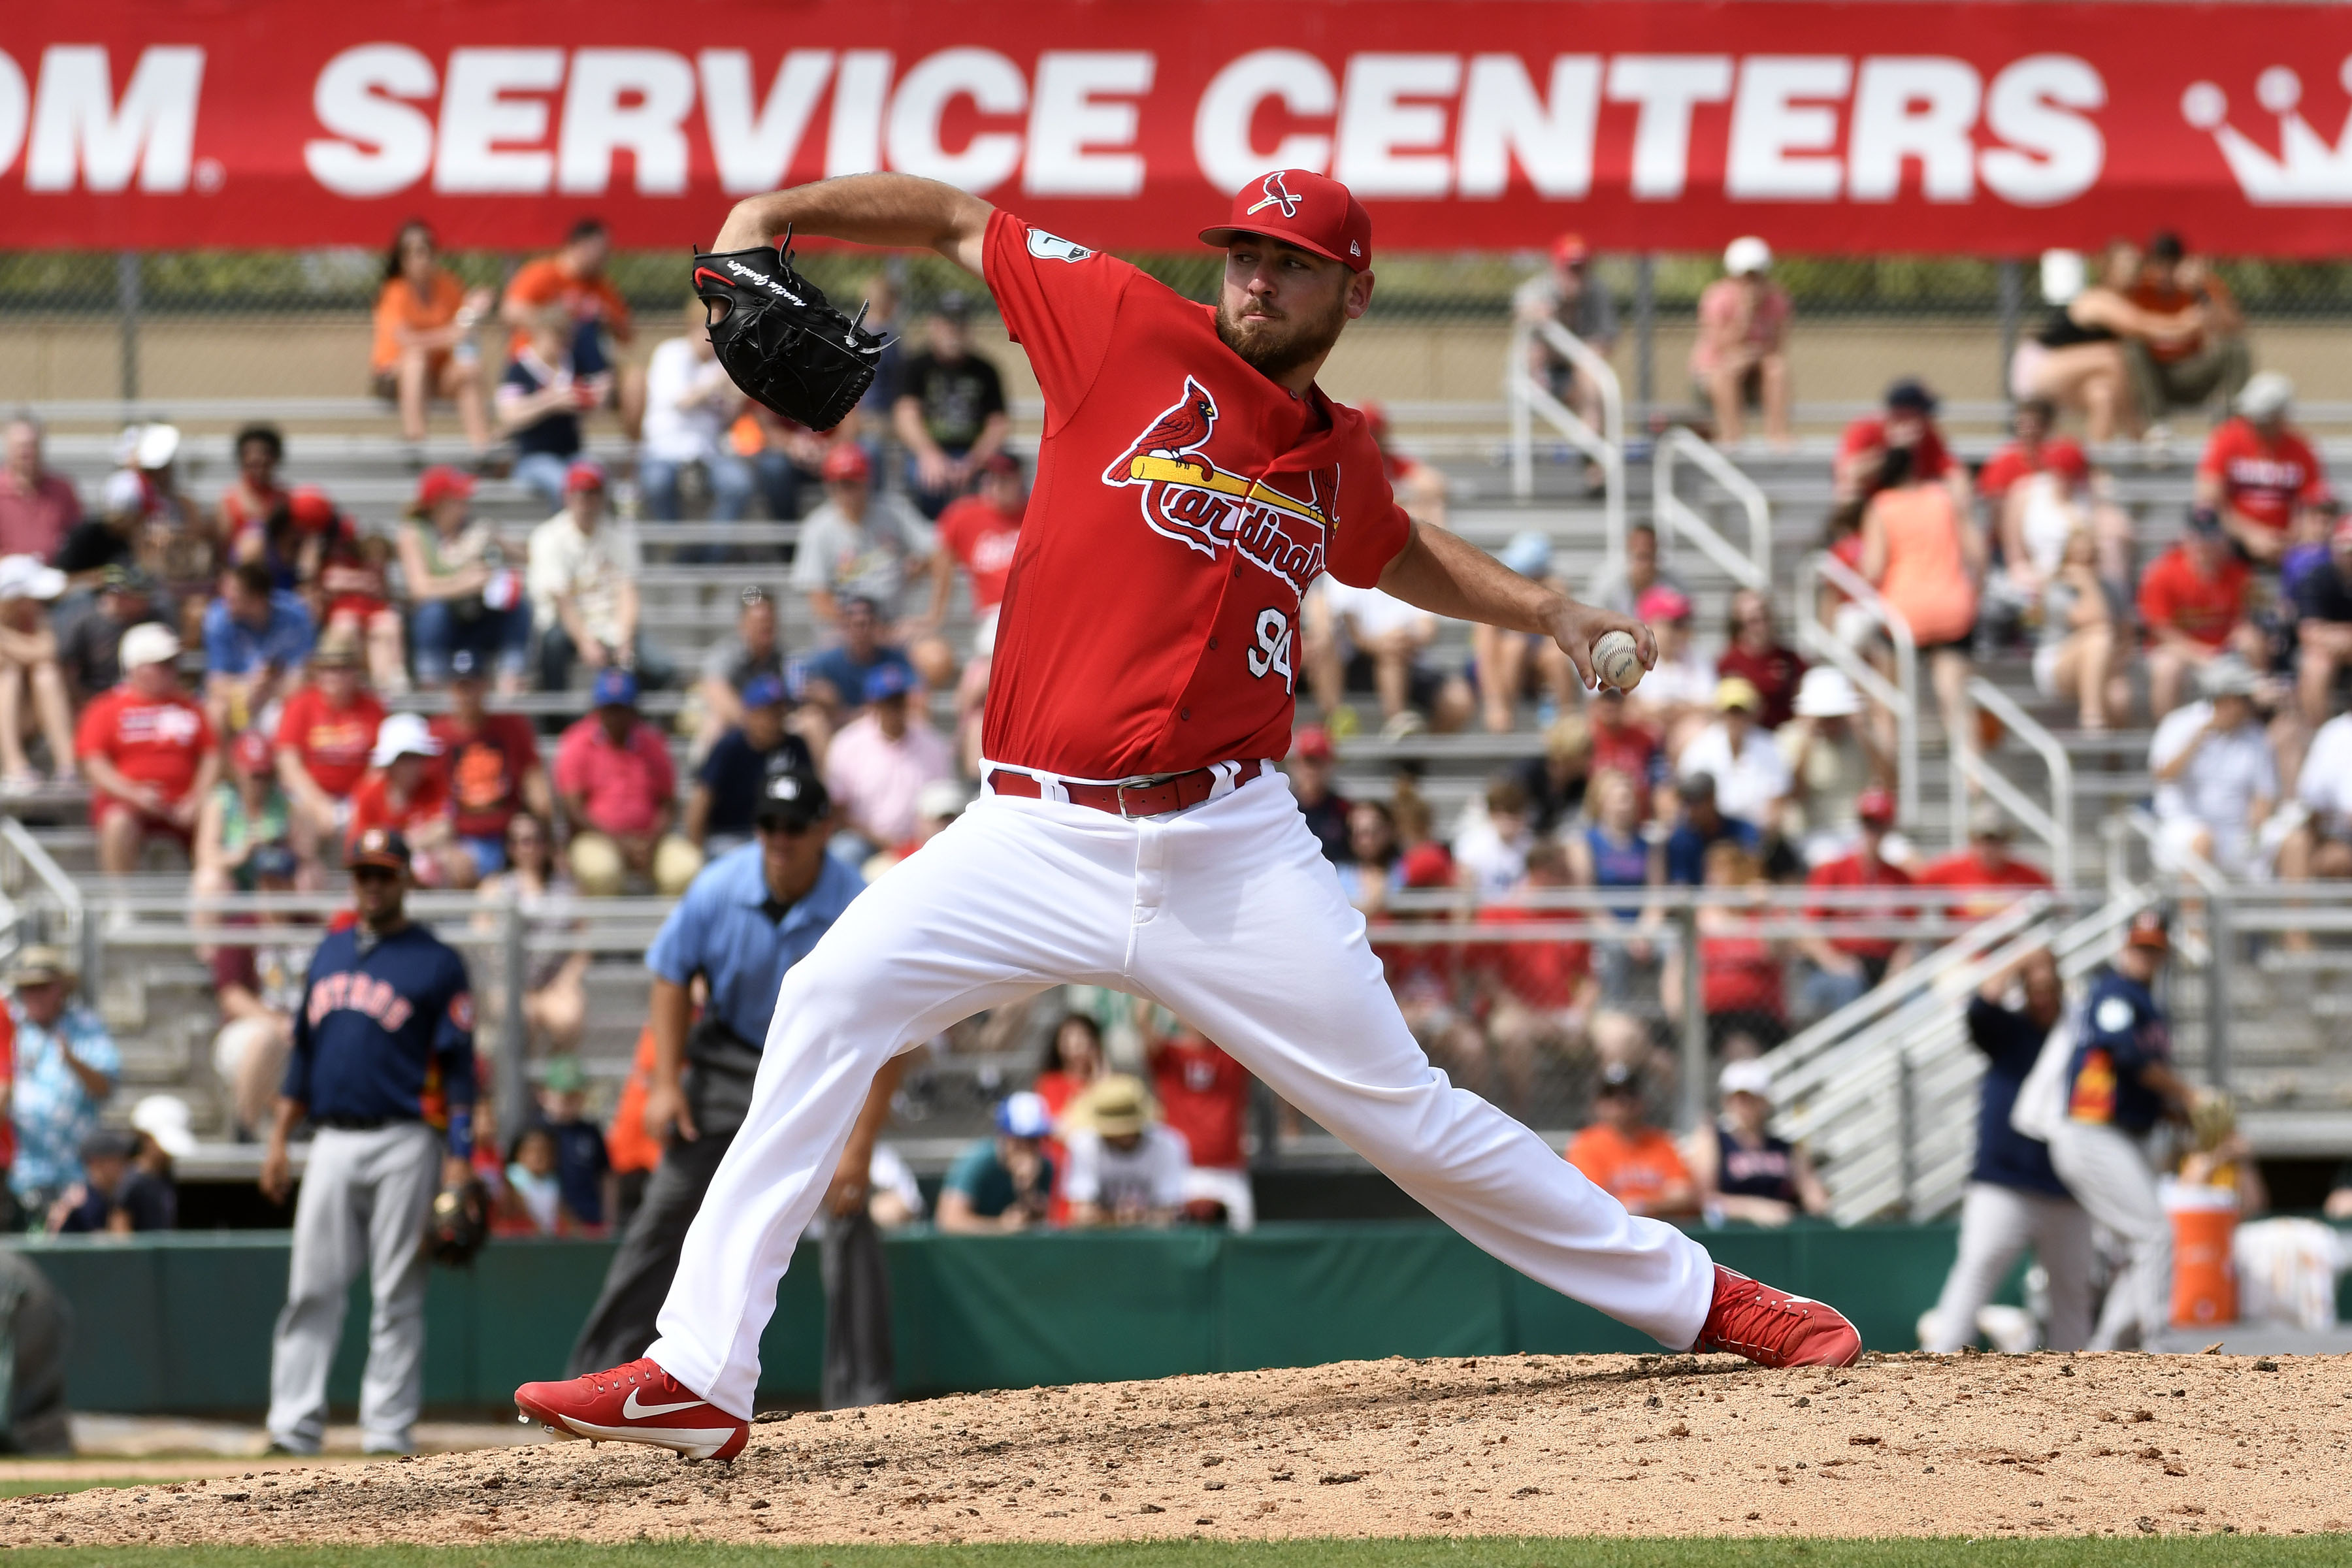 St. Louis Cardinals: Springfield to bolster strong pitching staff